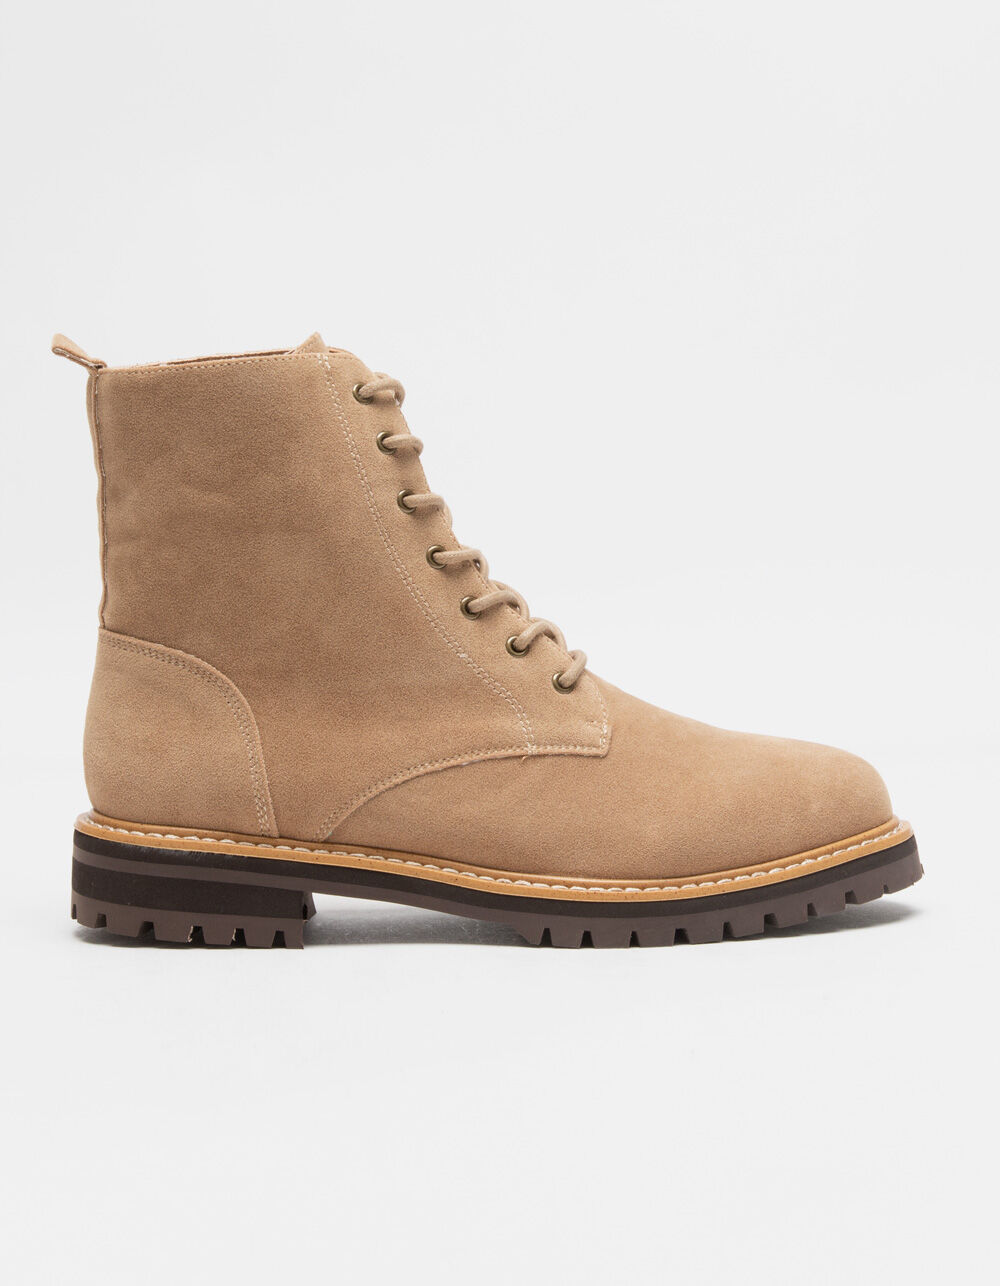 OASIS SOCIETY Womens Tan Lace Up Combat Boots - KHAKI | Tillys